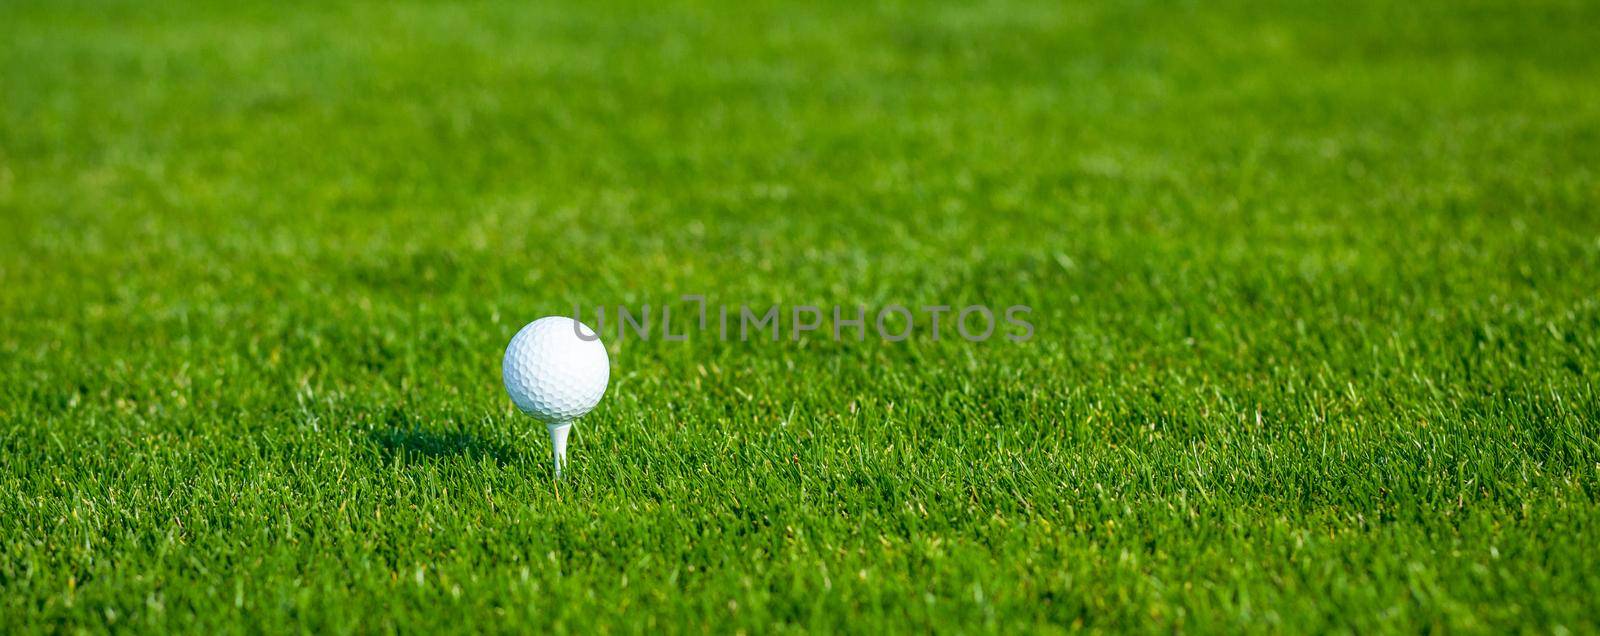 Golf Ball on a Tee in Low Grass on a Golf Course on a Sunny Day. Copy Space. Close-up by LipikStockMedia